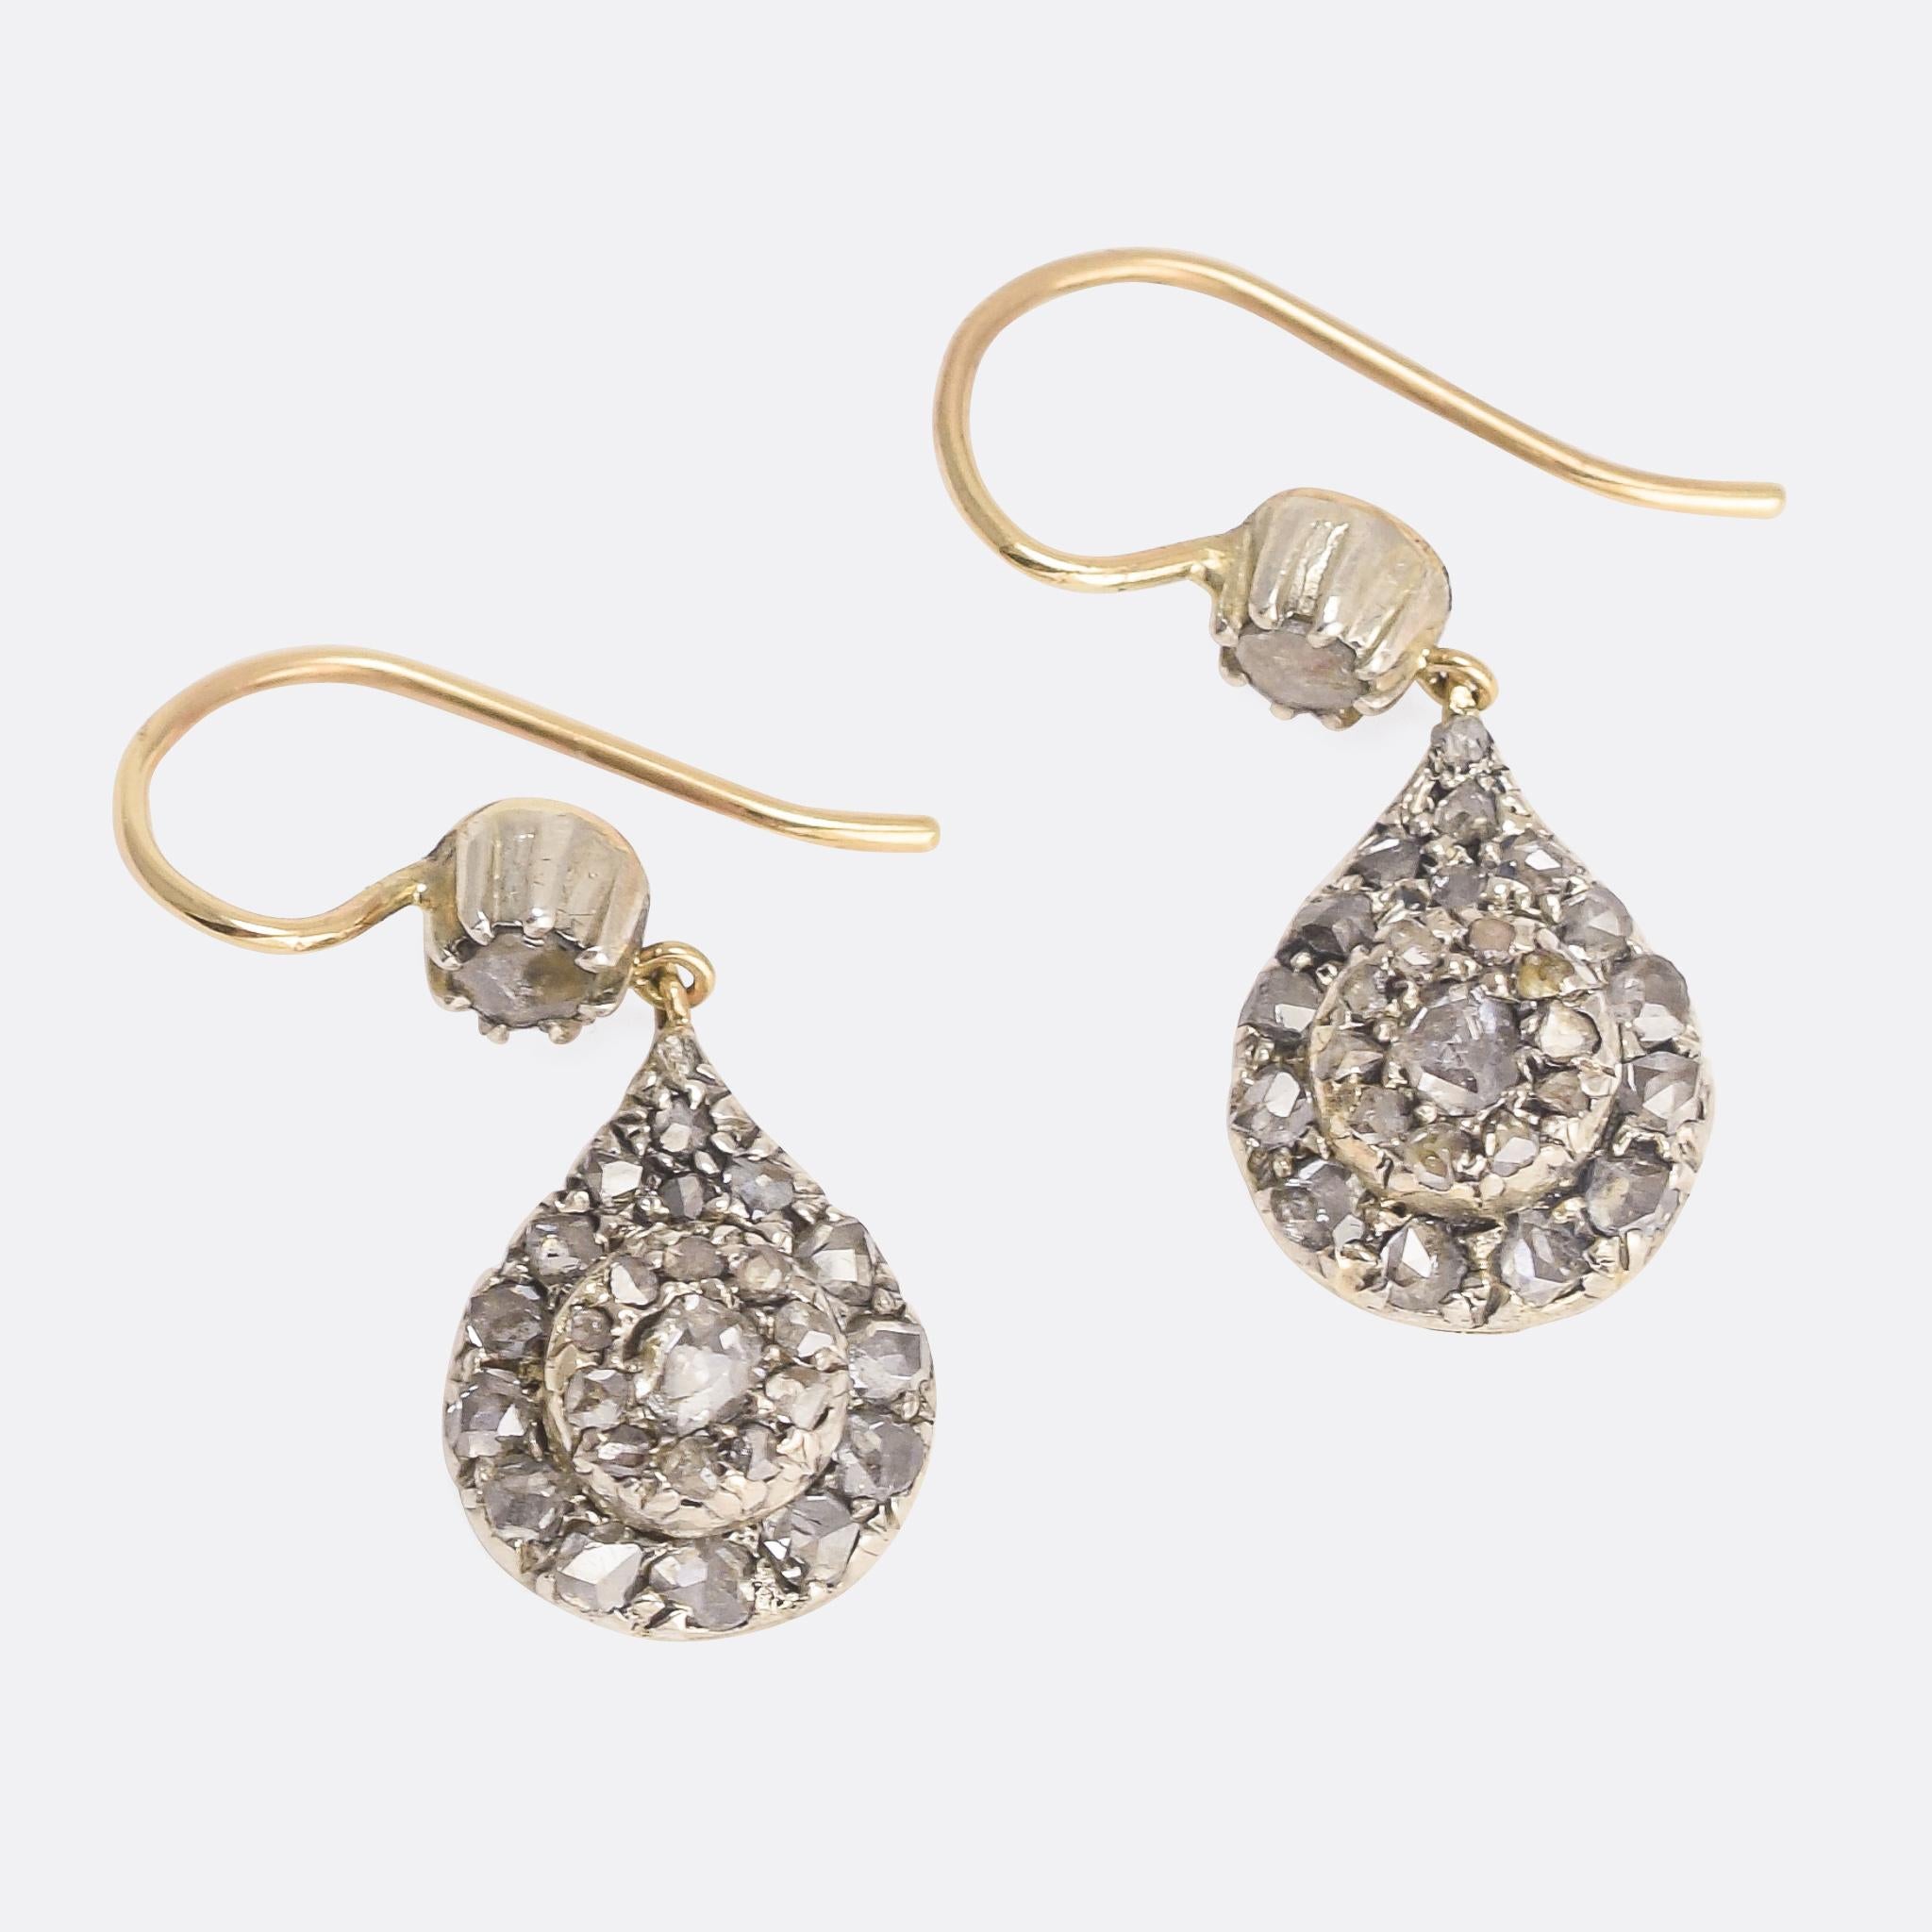 A gorgeous pair of antique teardrop earrings. The drops are pavé set with rose cut diamonds, and hang from diamond-set tops. They're a great size, a little over 1 inch drop, and a particularly elegant design. They were handmade in the early 19th